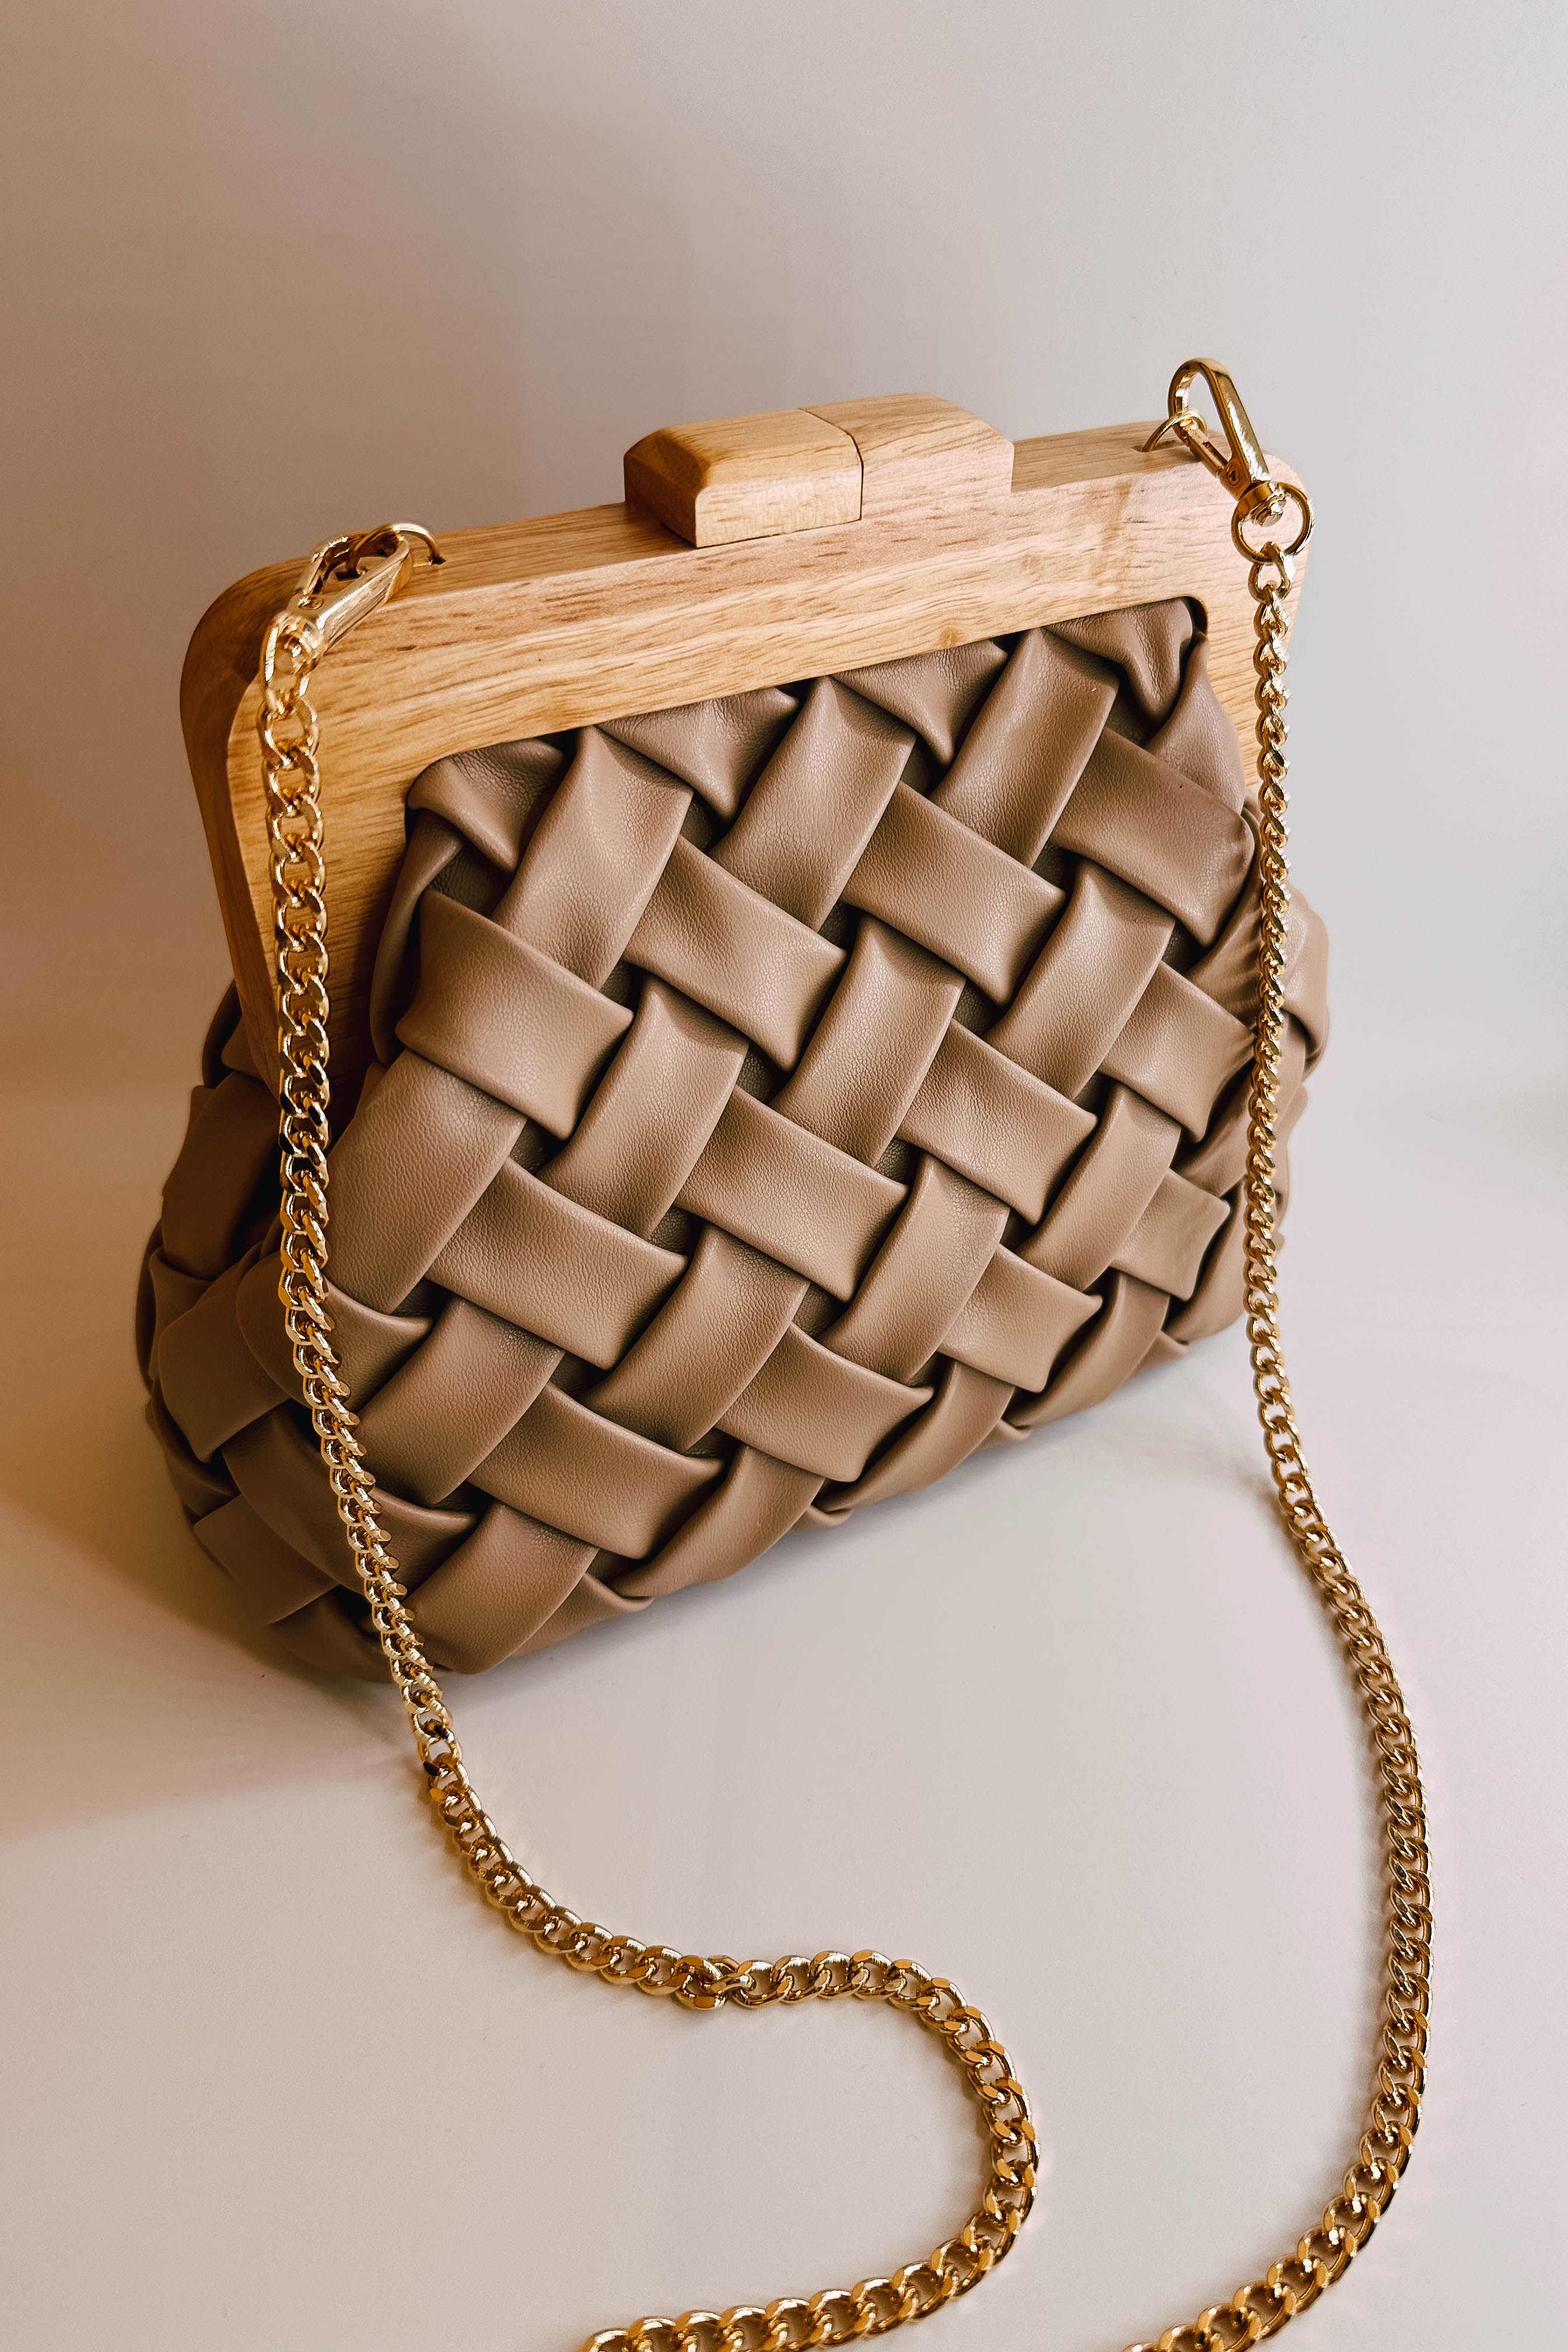 Ariel view of the Jessica Taupe Woven Clutch which features taupe leather fabric, woven design, wooden clasp closure and removable gold chain strap.